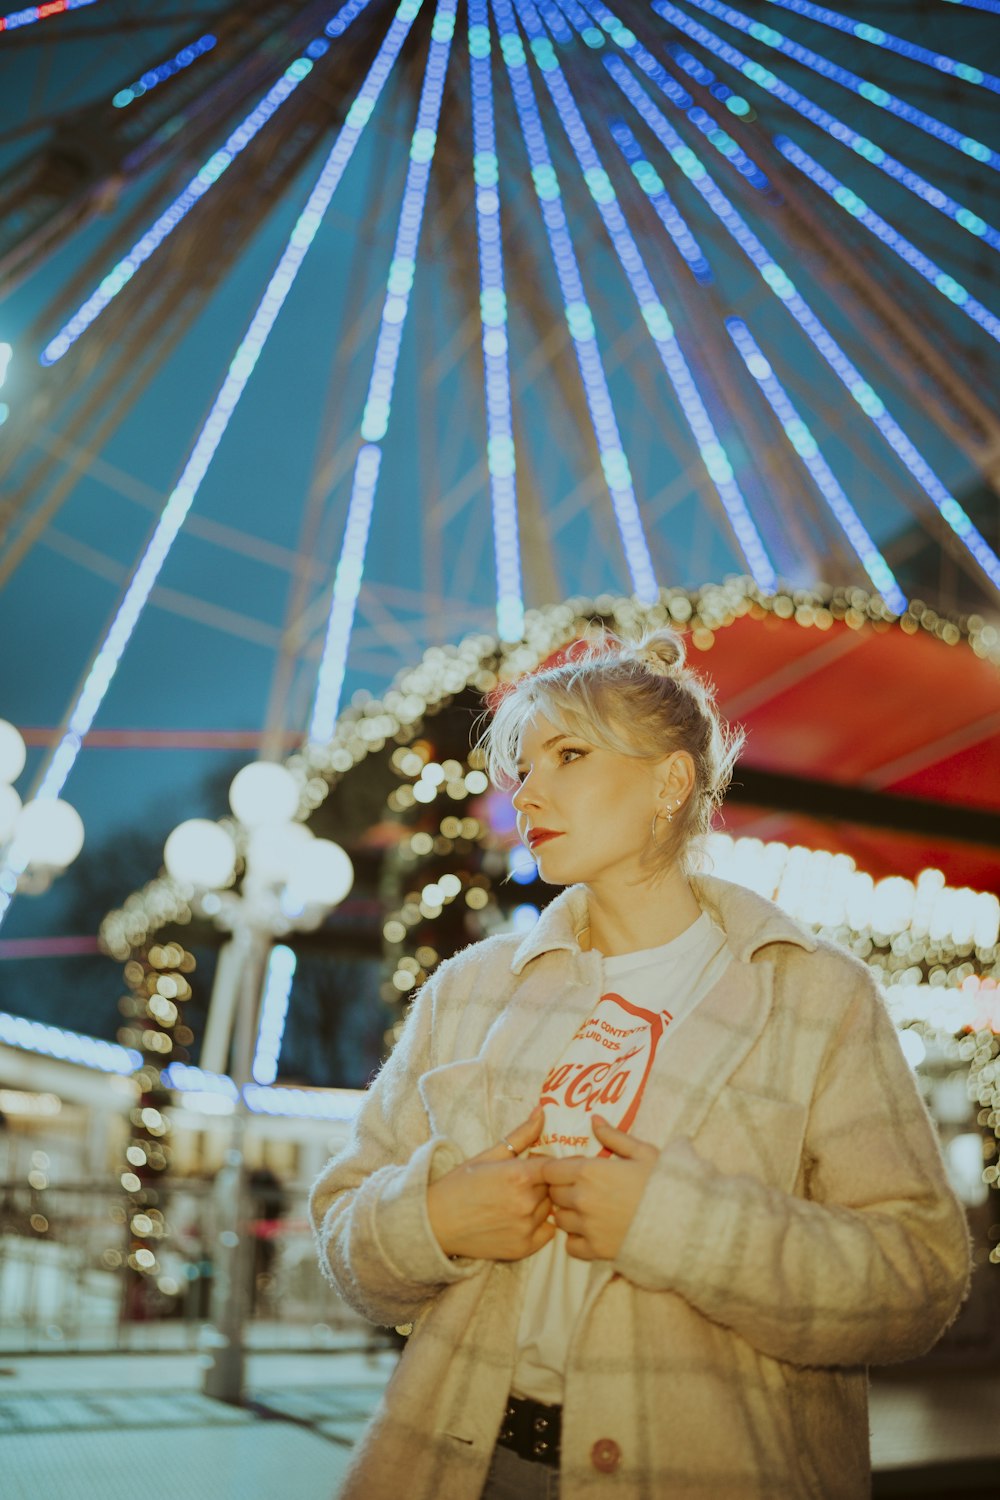 a woman standing in front of a ferris wheel